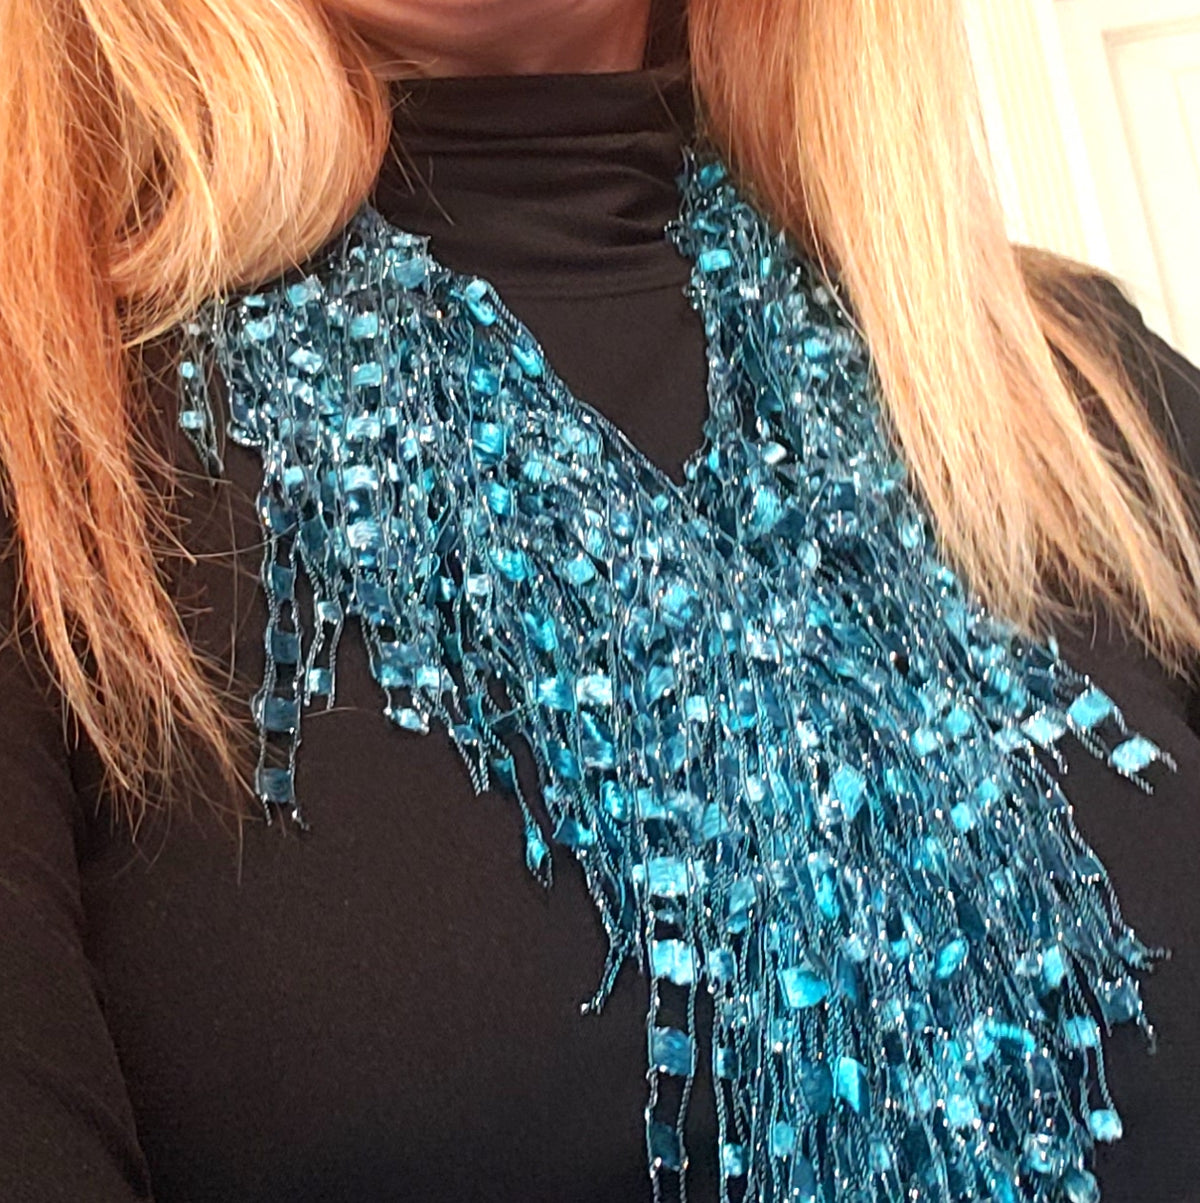 Teal Scarf Necklace - Turquoise Necklace